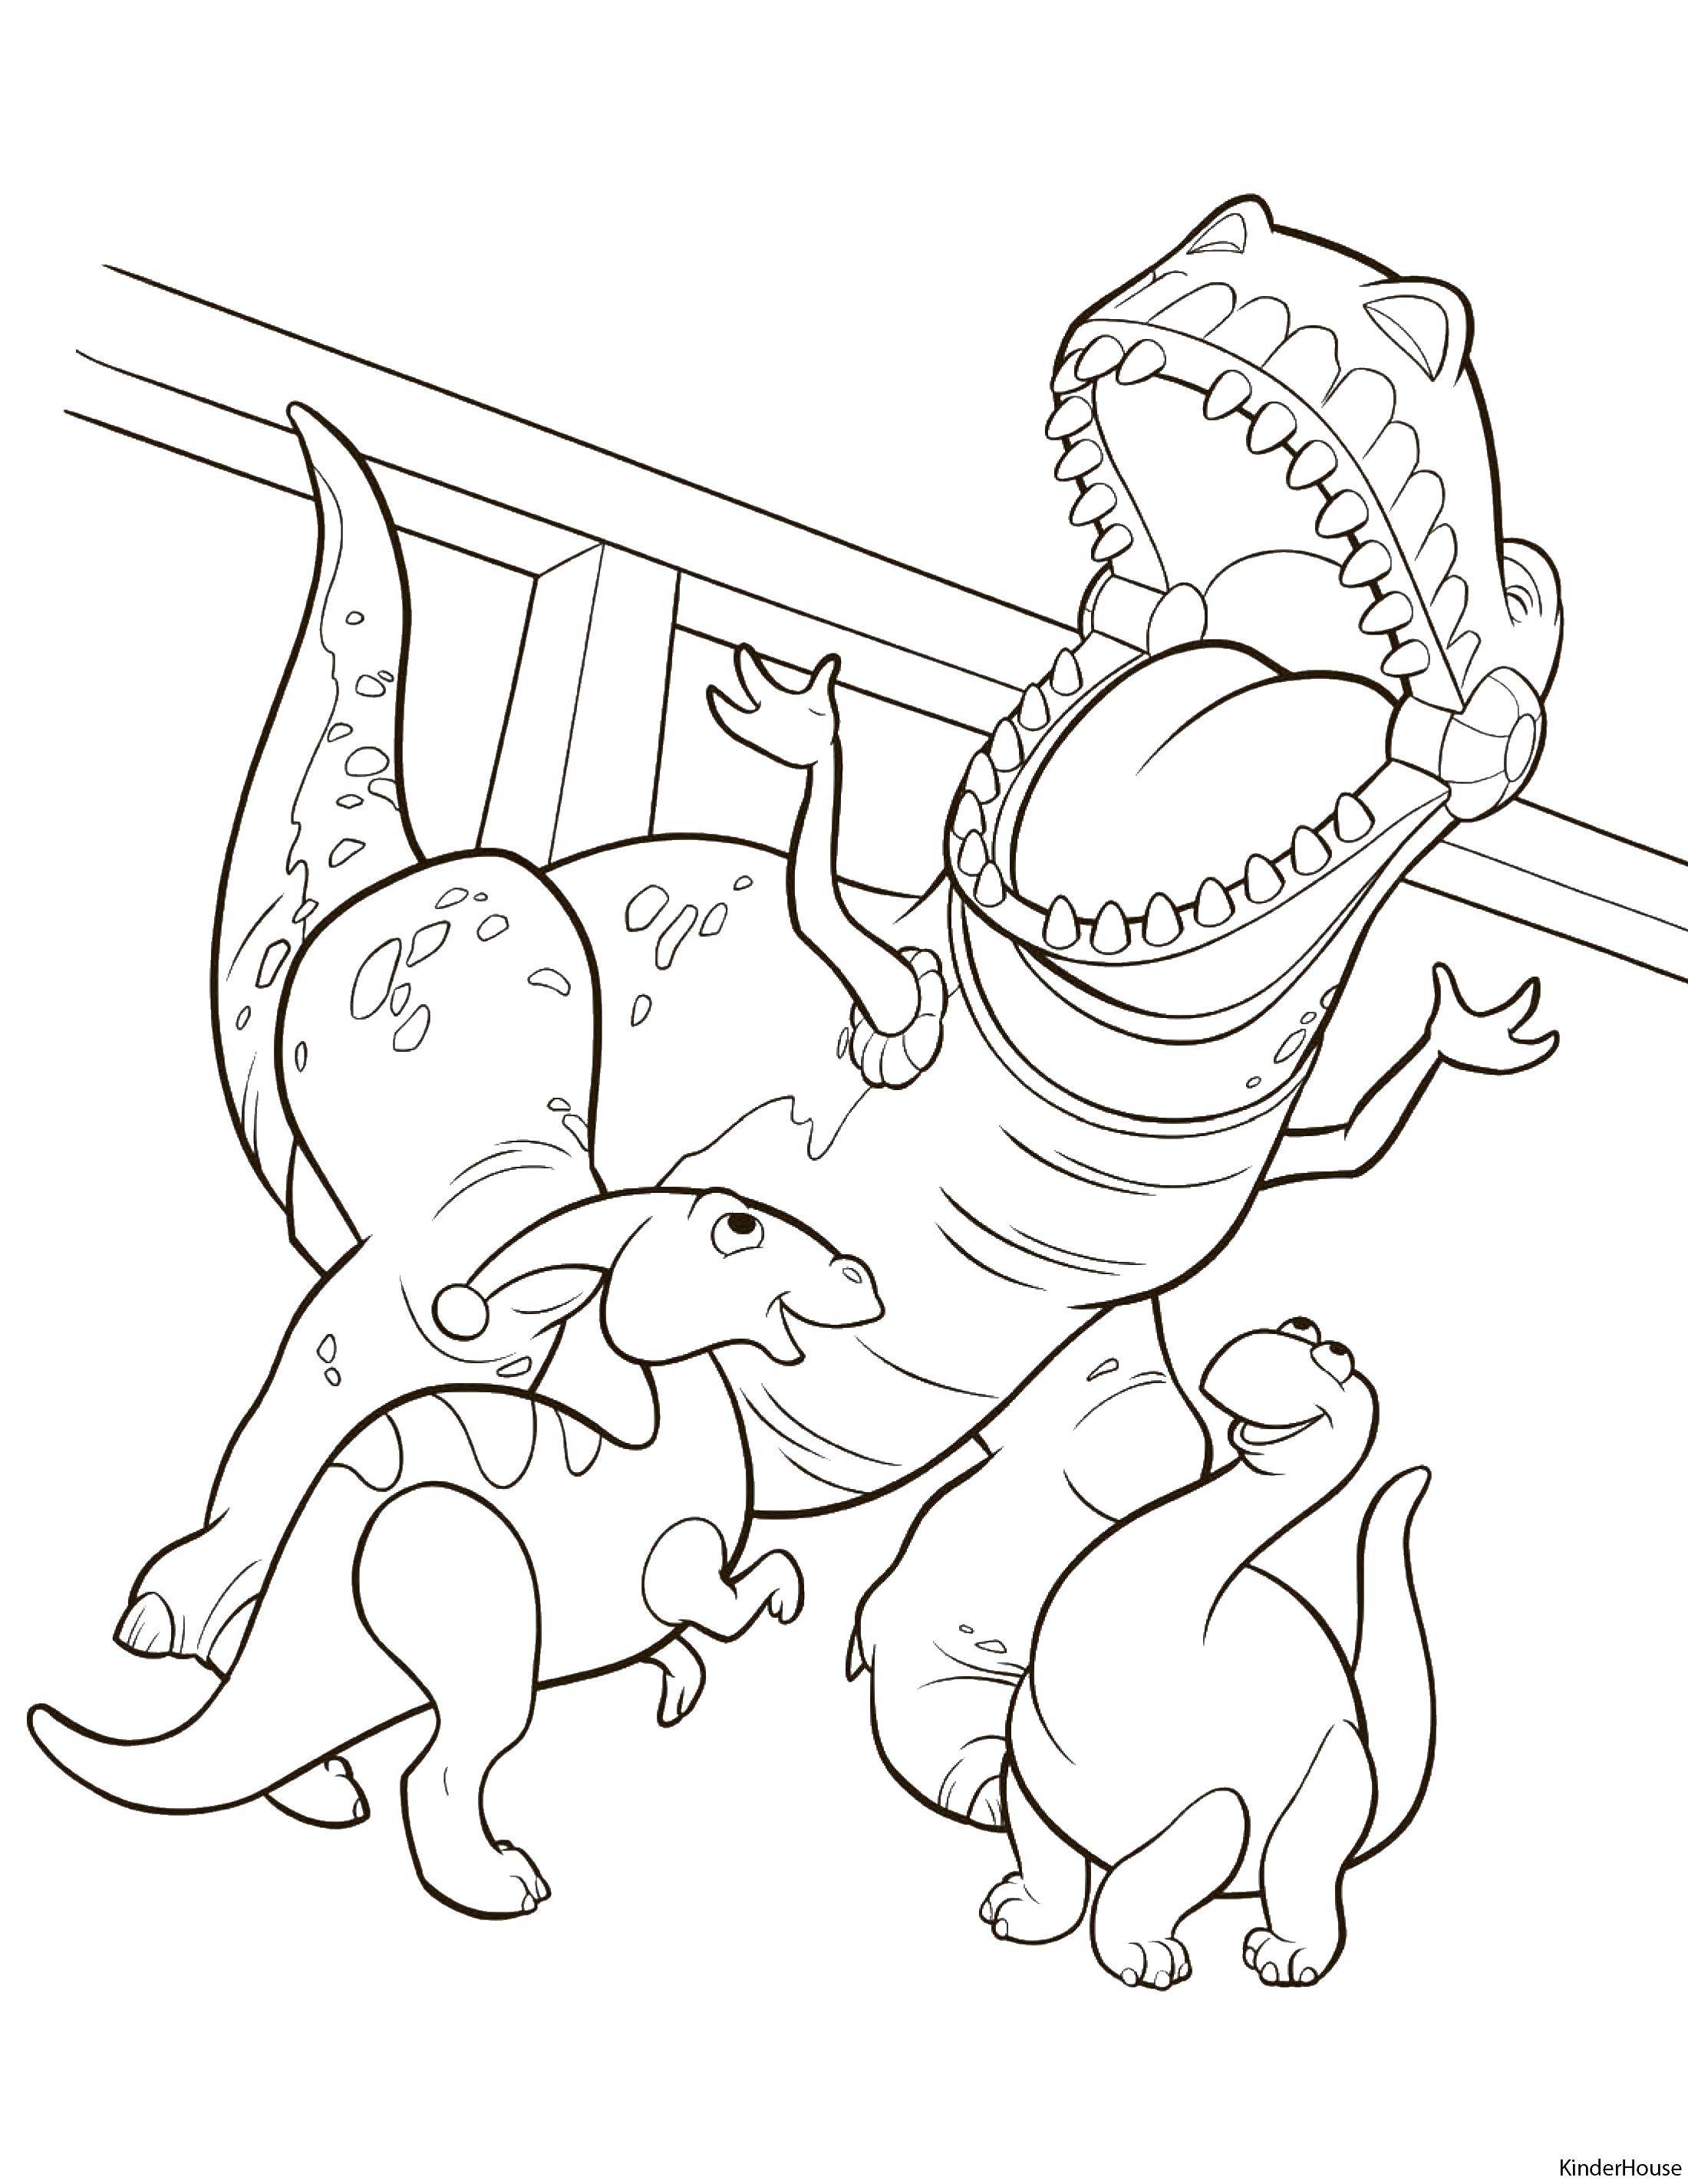 Coloring Dinosaur Rex. Category toy story. Tags:  dinosaur Rex toy story.